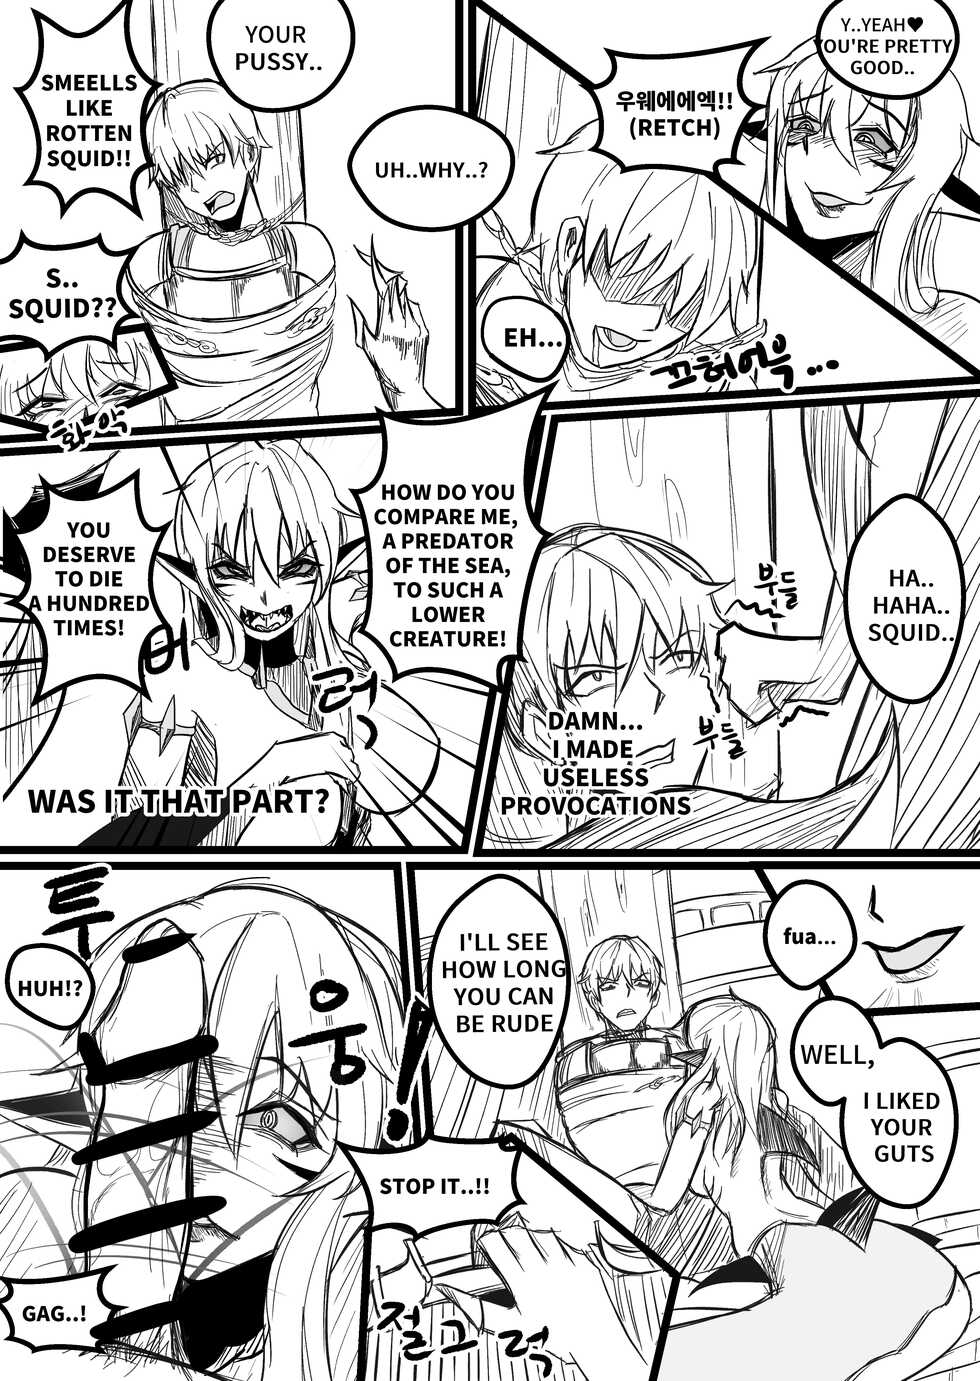 [Limsett] THE DAY BECAME A WAIFU [English] - Page 7